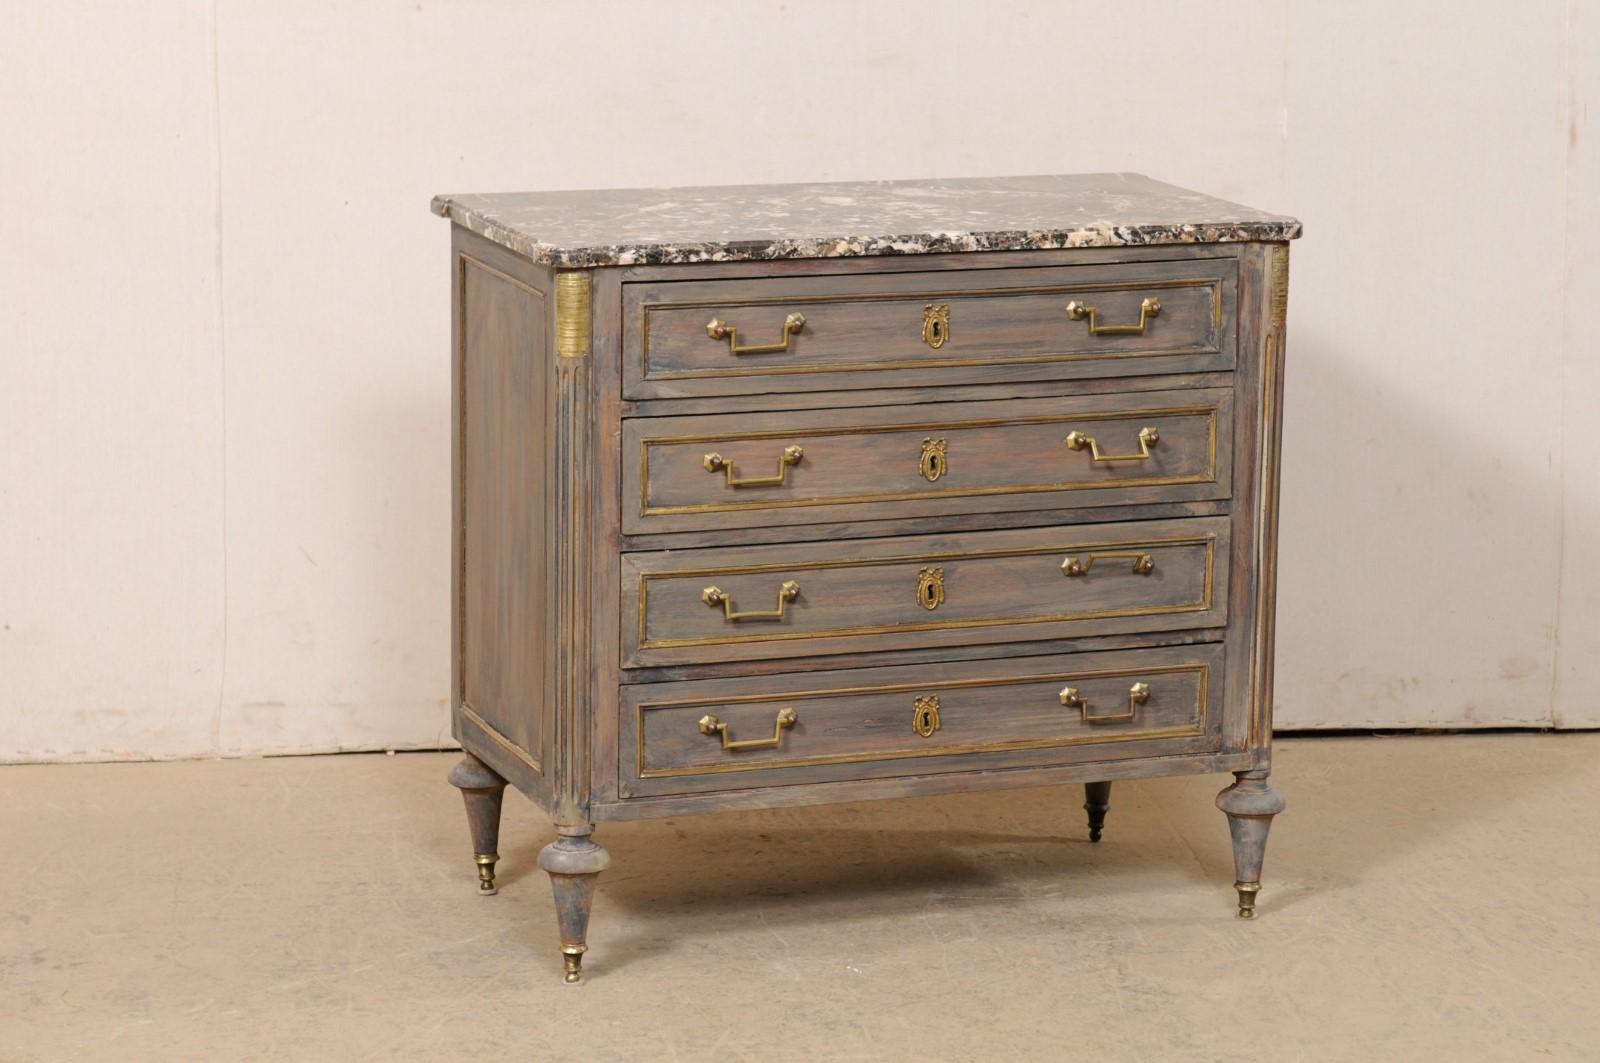 A French neoclassical style commode with marble top from the 19th century. This antique chest from France features its original rectangular-shaped marble top, with pronounced rounded corners, which rests atop a neoclassical style case with rounded